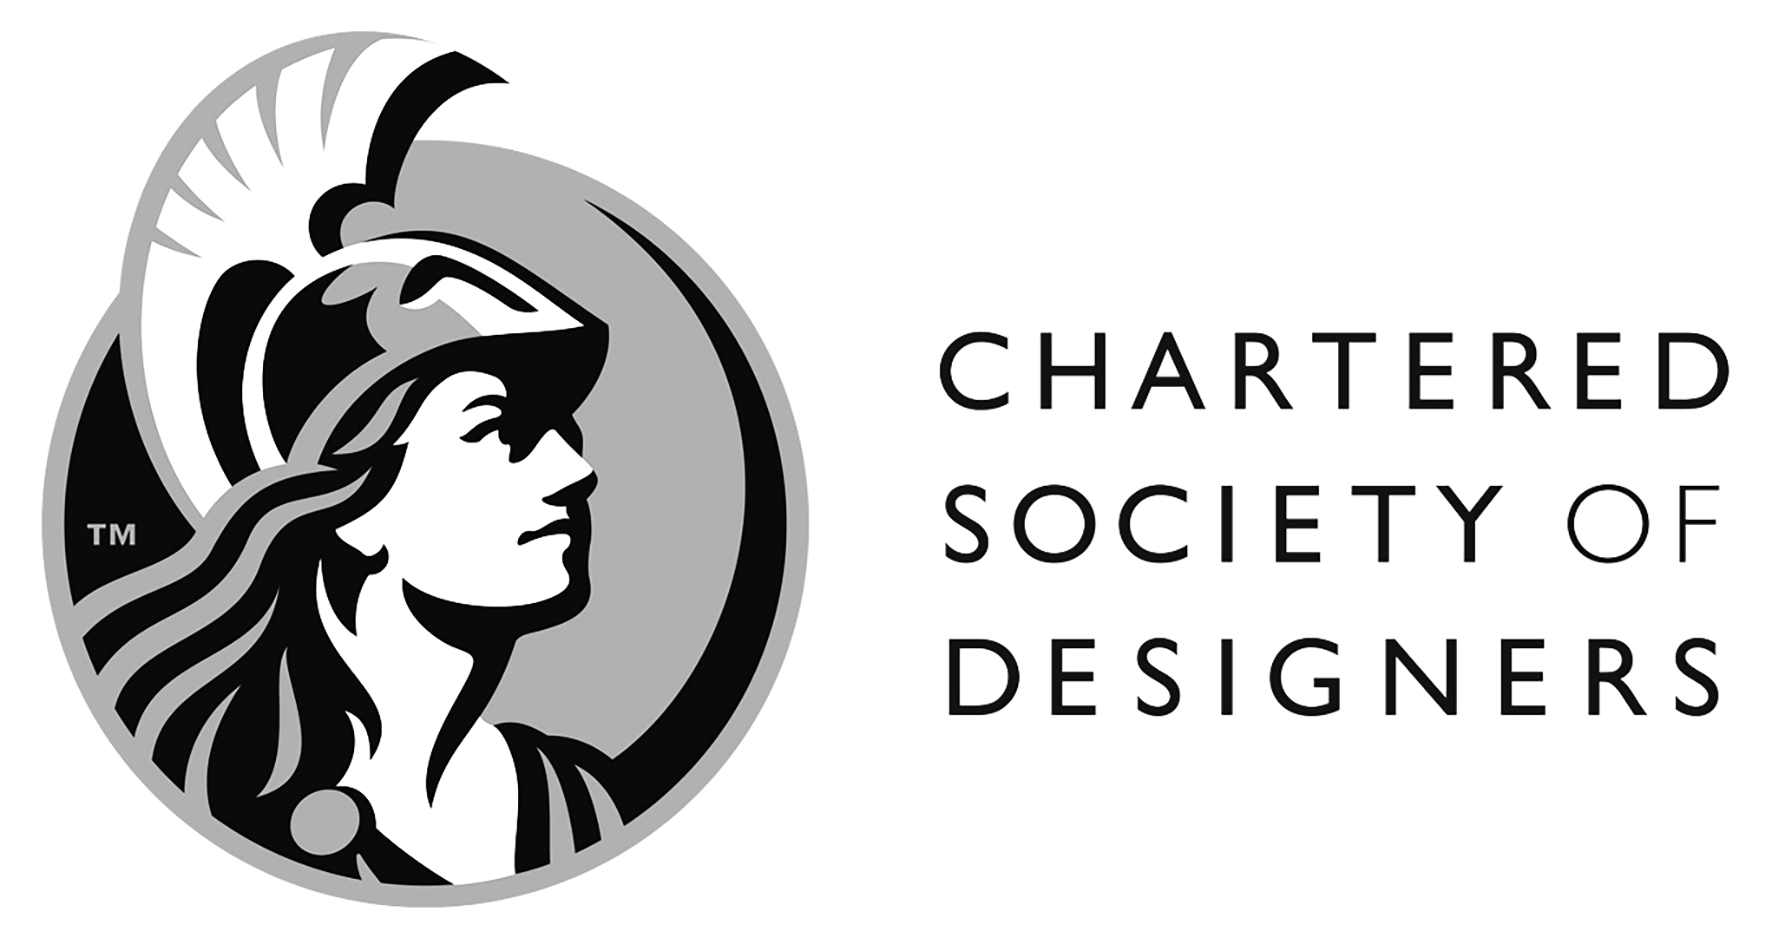 The Chartered Society of Designers